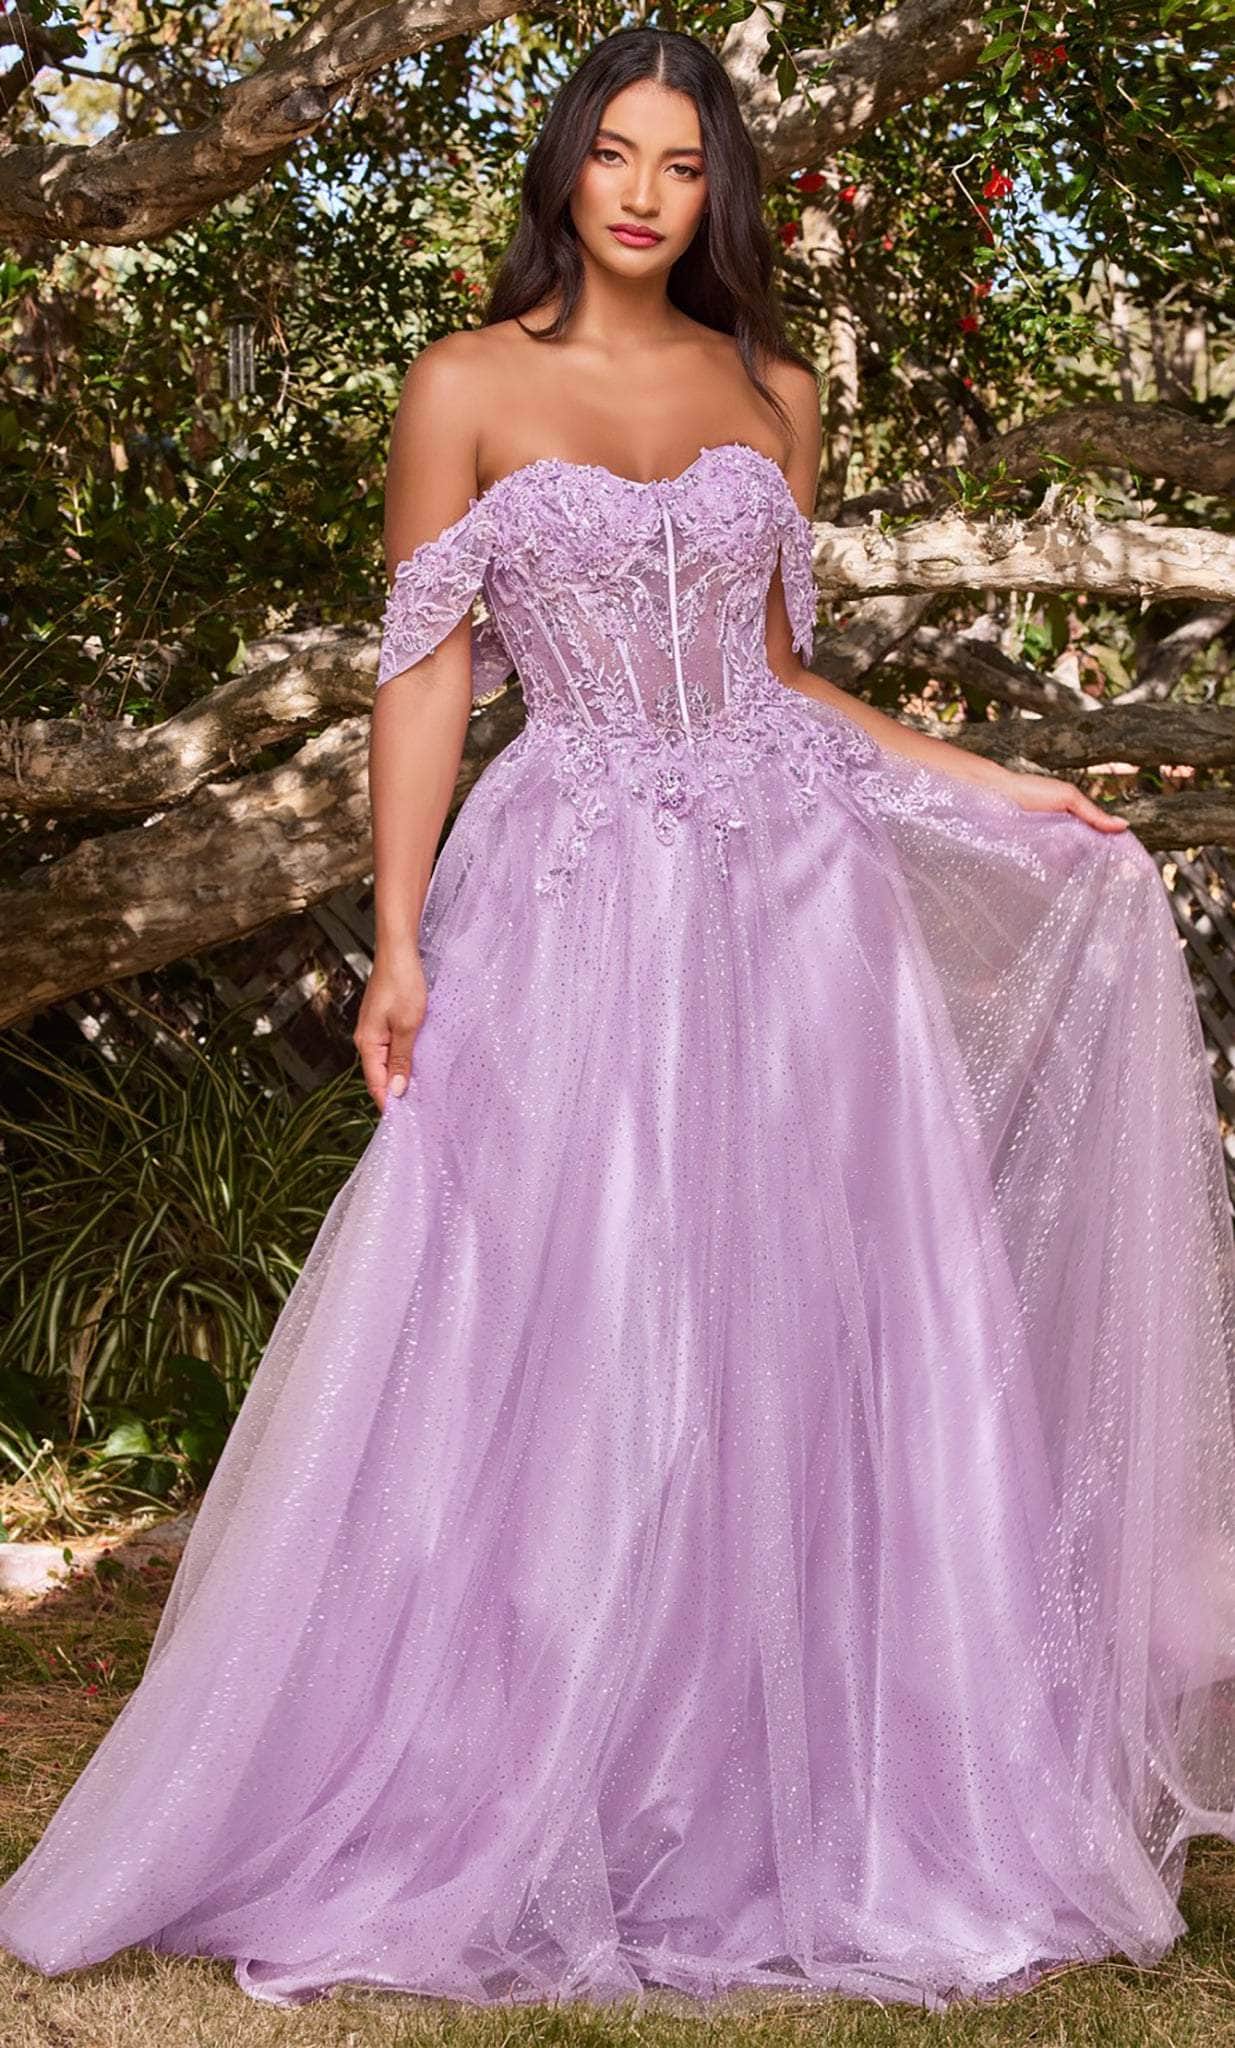 Ladivine CD0198 - Lace A-Line Prom Dress – Couture Candy